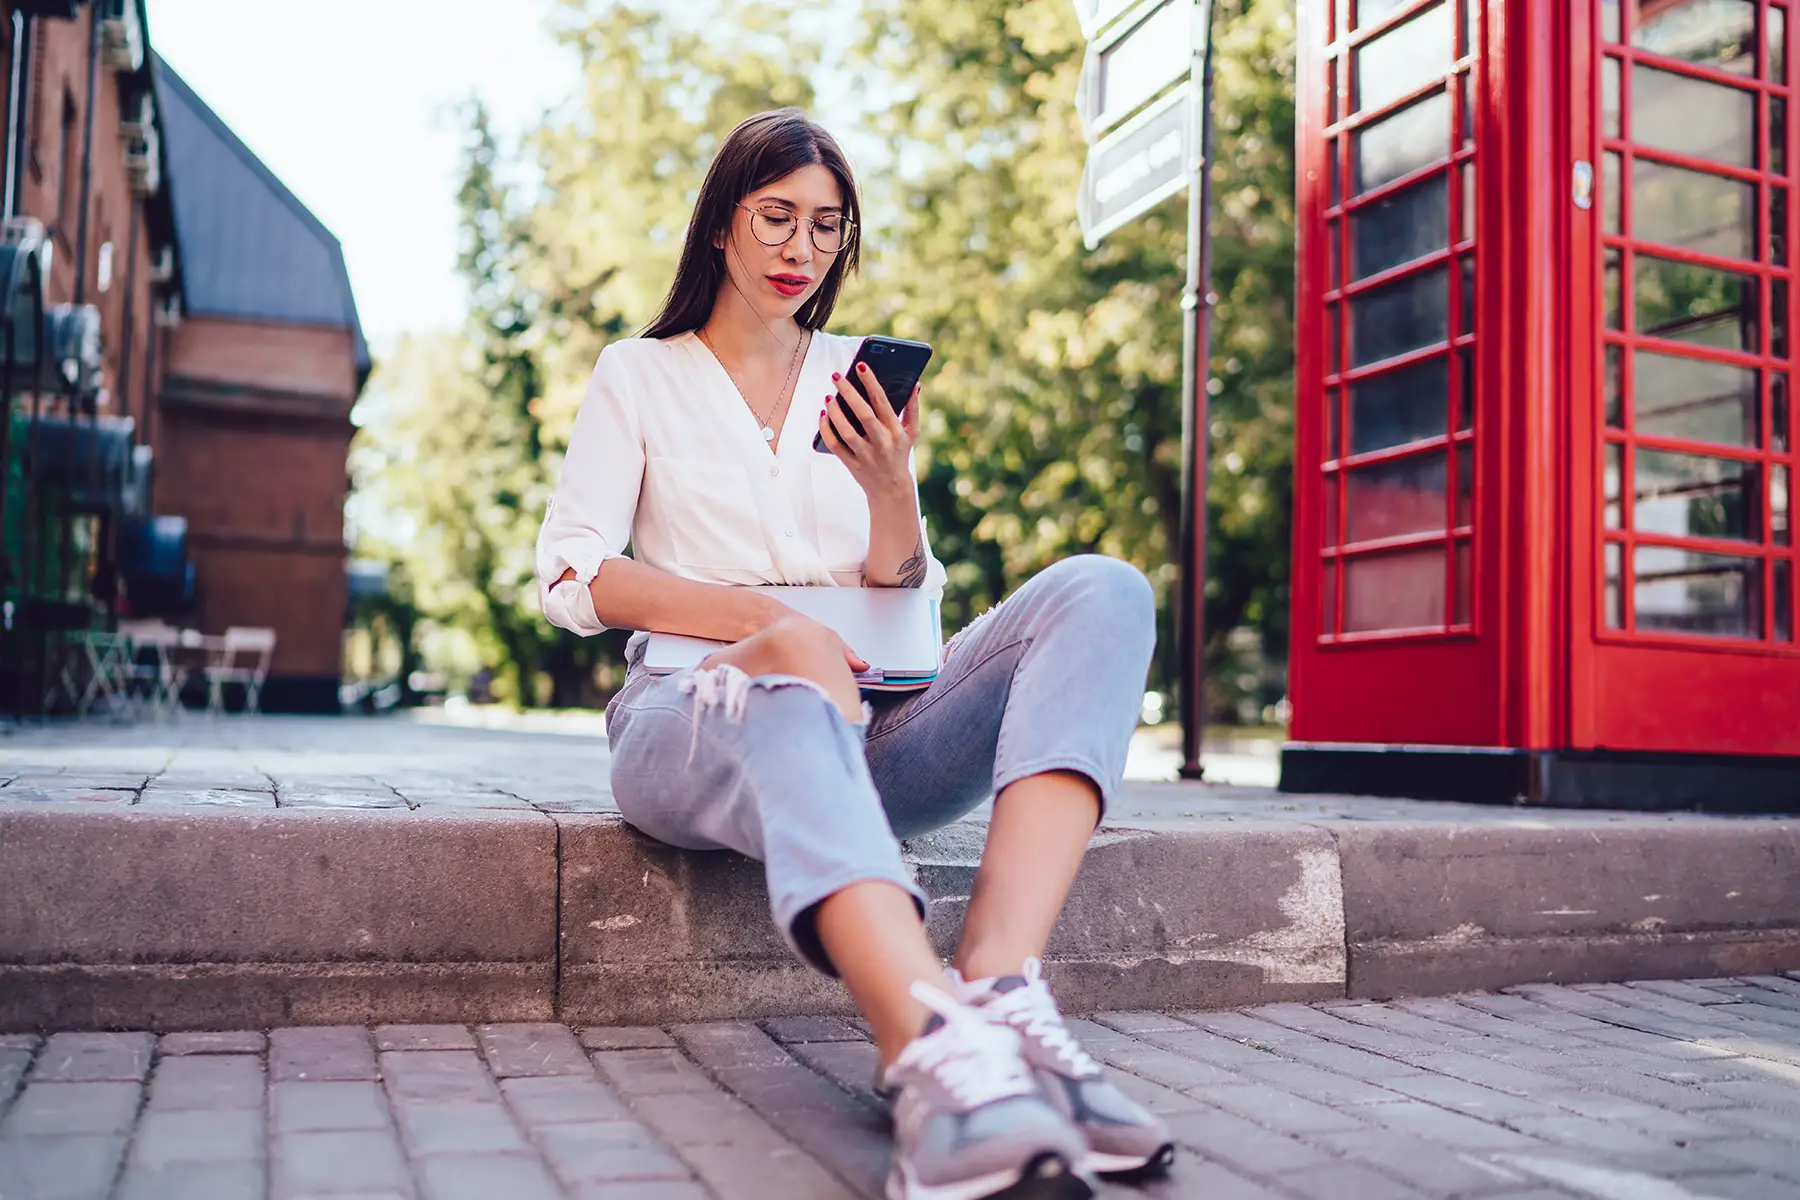 Woman using an app on her phone in London, UK